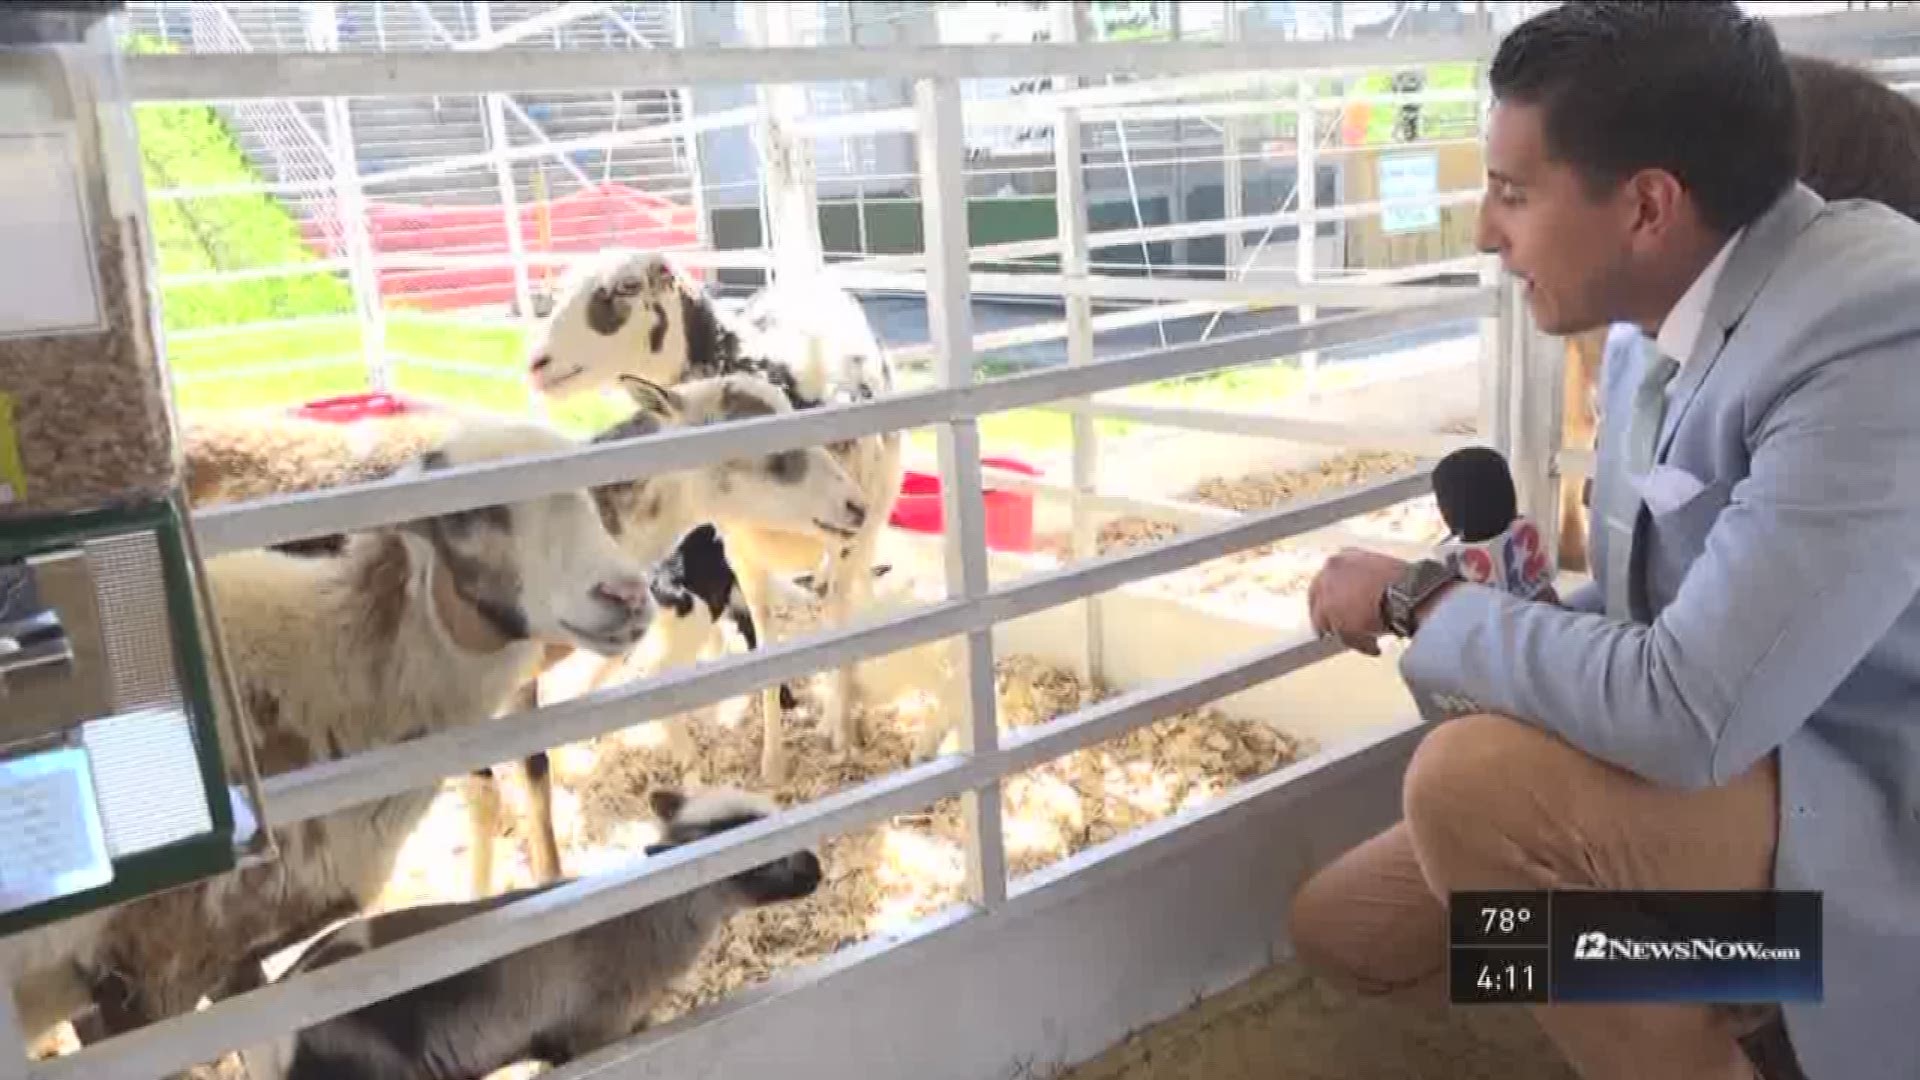 12News visits the exotic petting zoo at the state fair